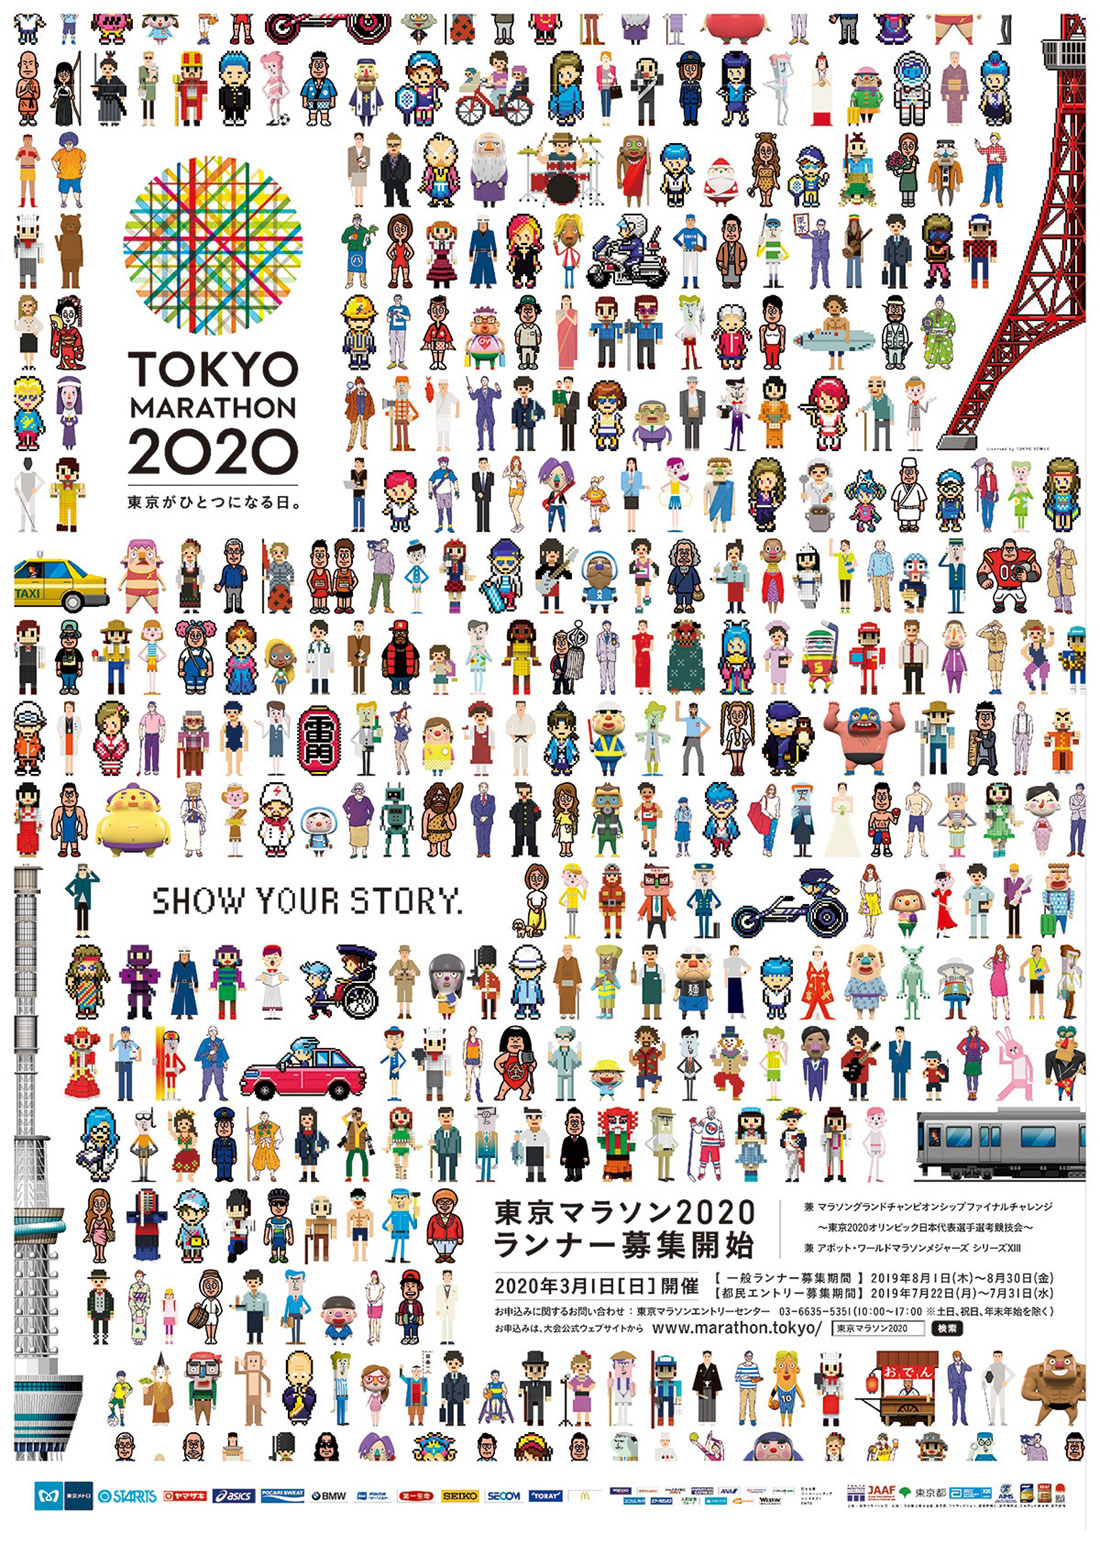 Tokyo Marathon 2020 Registered Runners Residing in People's Republic of China